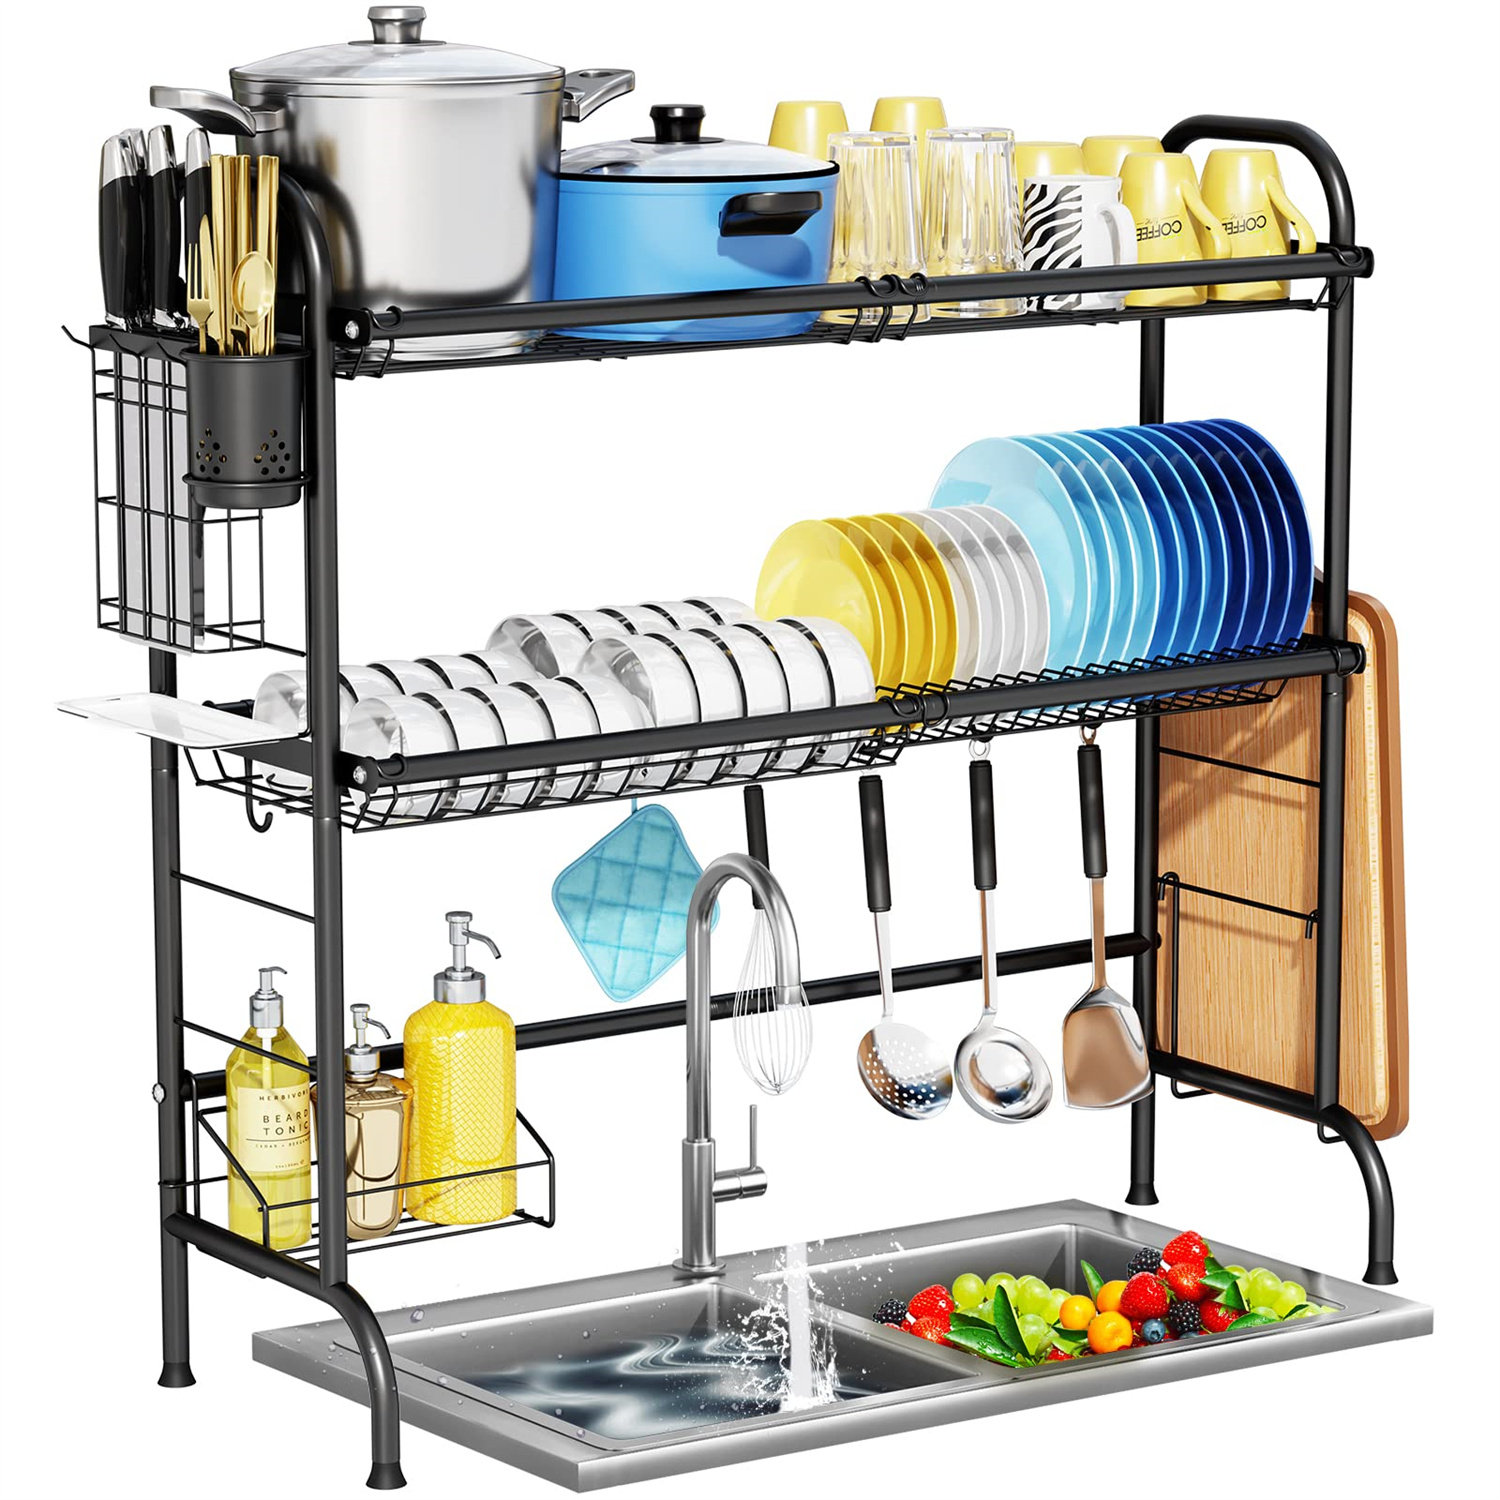 Large Dish Drying Rack with Drainboard Set, Boosiny 2 Tier